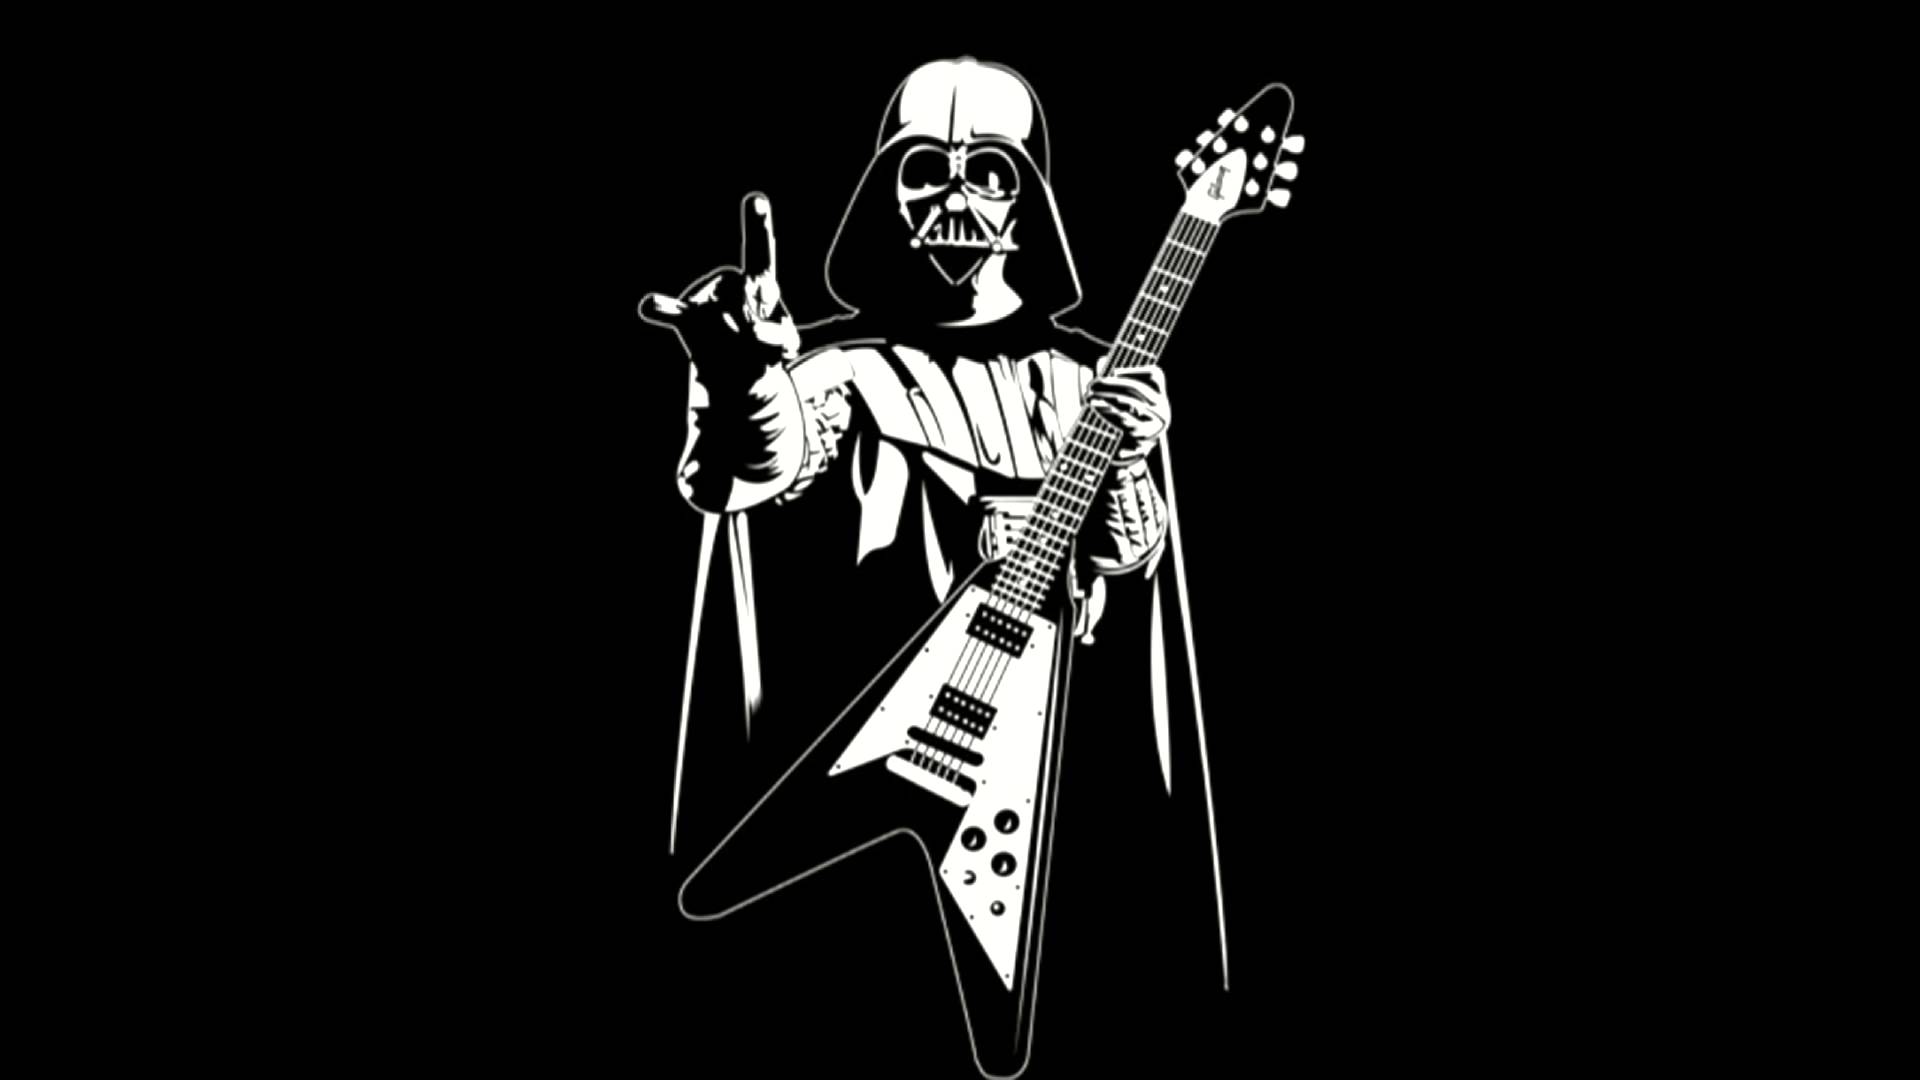 Imperial March - Darth Vader theme (Boma Metal Orchestra) - YouTube